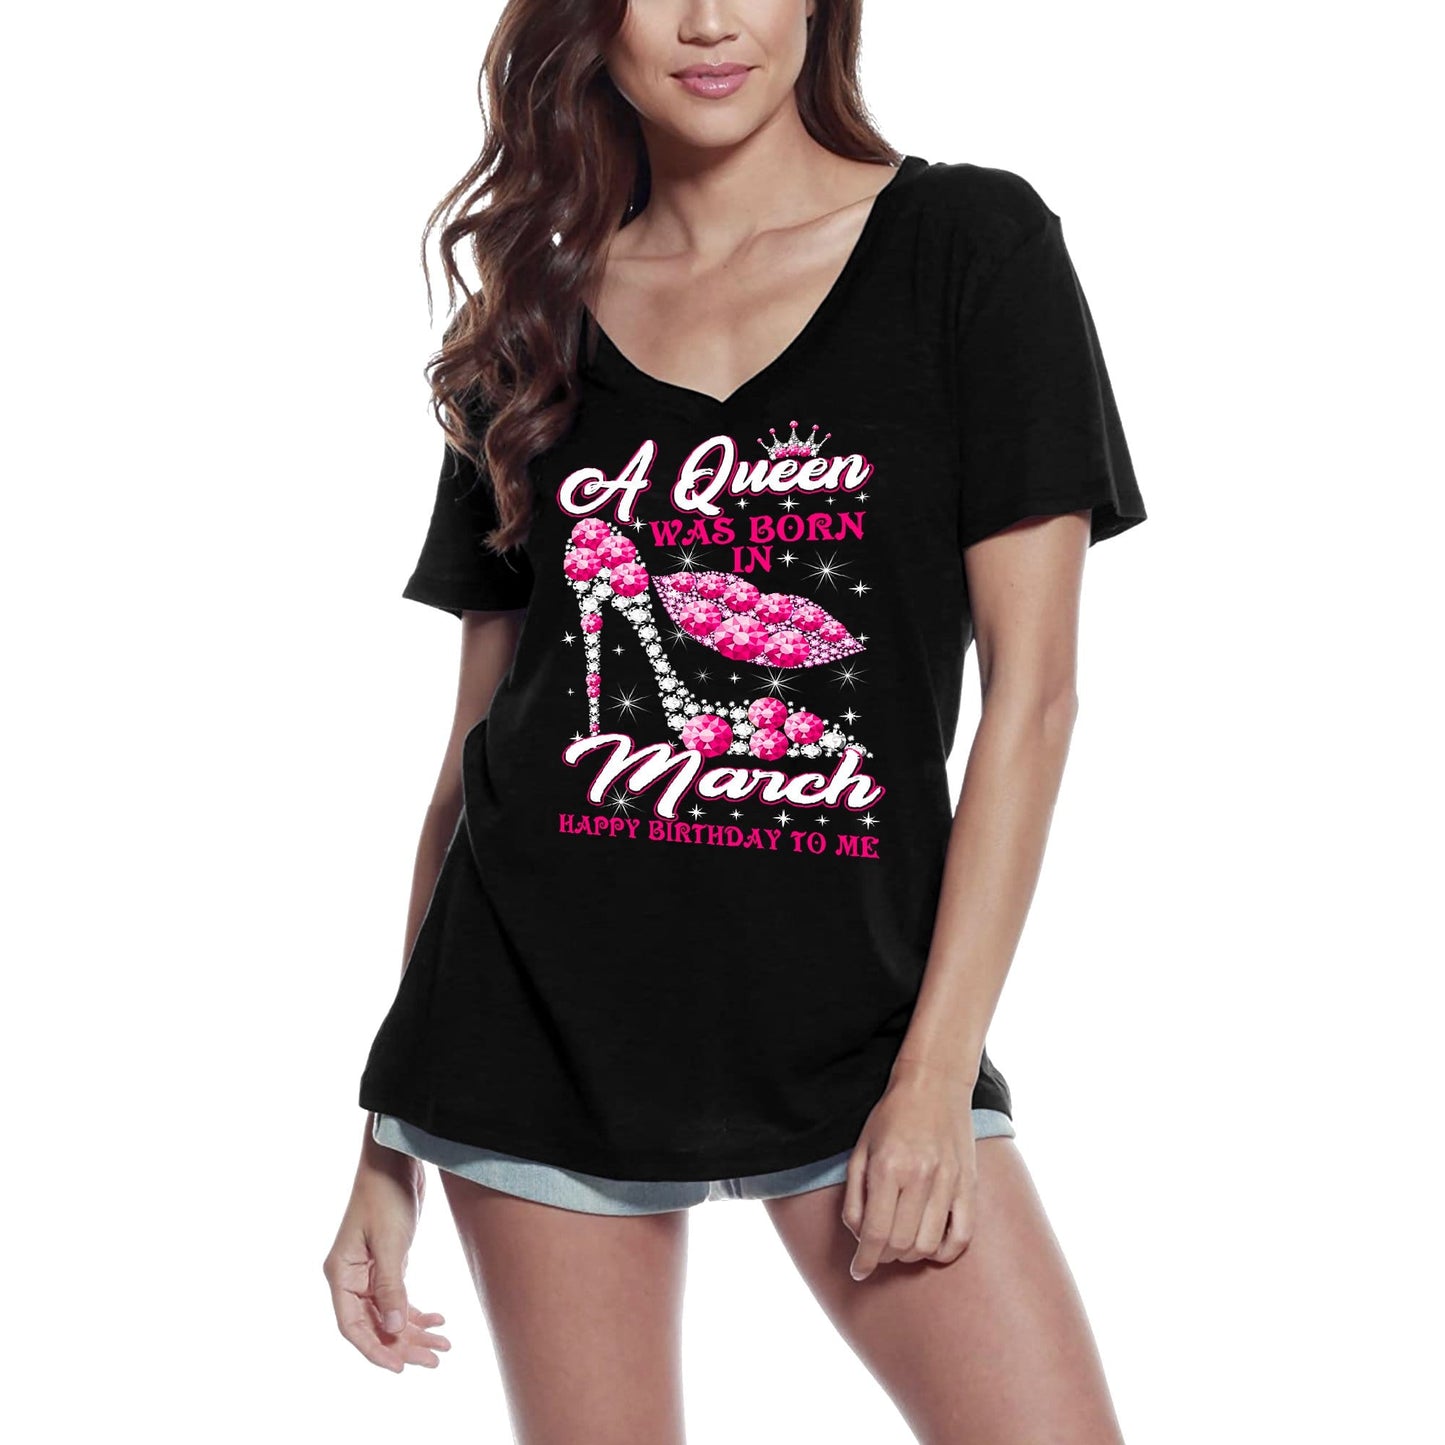 ULTRABASIC Women's T-Shirt A Queen Was Born in March - Happy Birthday Shirt for Ladies